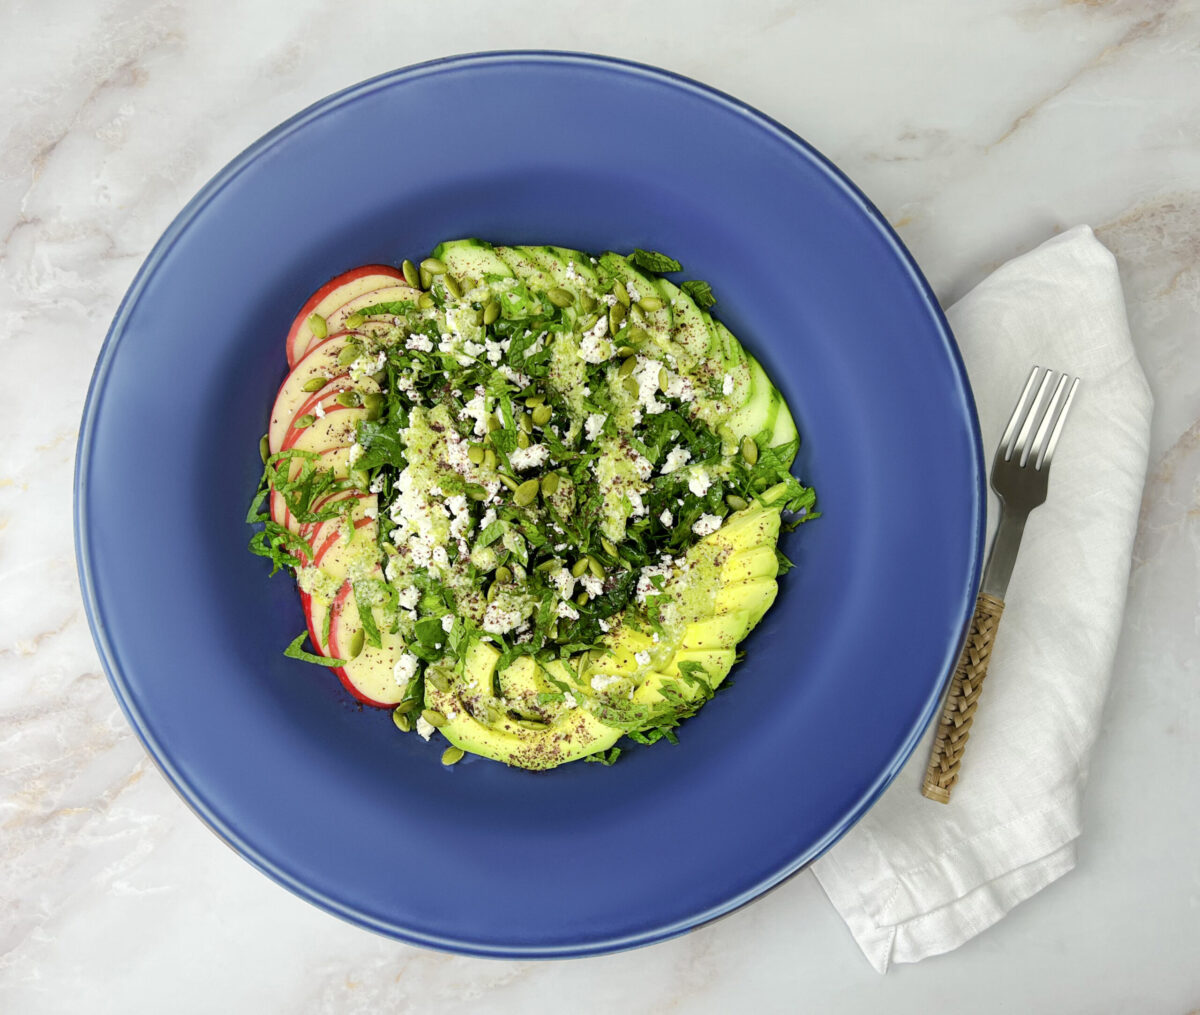 A vibrant and nutritious kale apple salad with slices of cucumber, avocado, apple, sprinkled with feta cheese, toasted pumpkin seeds, and a hint of sumac."